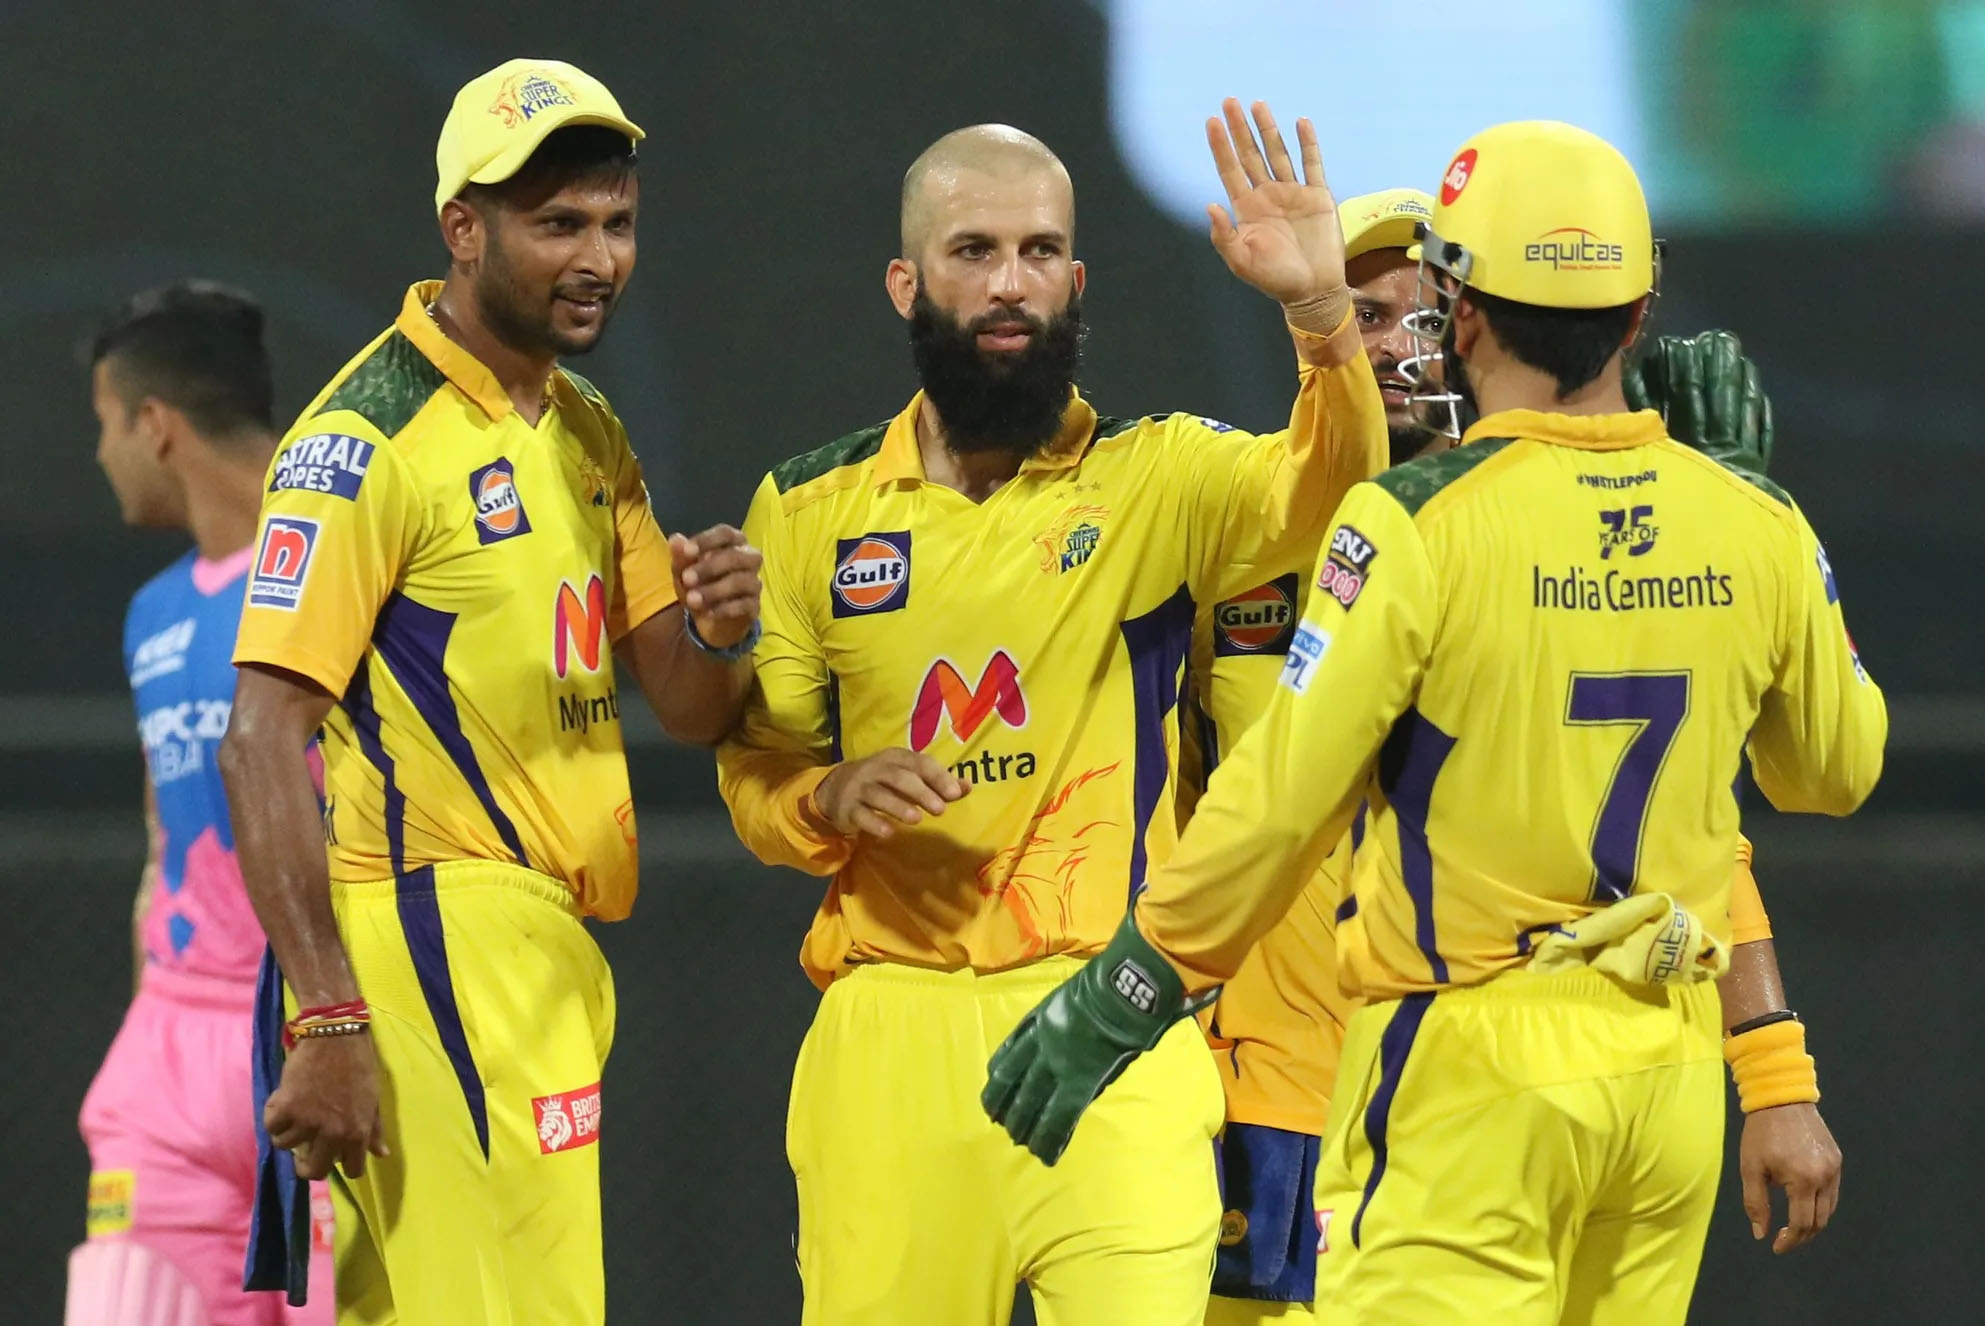 Chennai powers to a comprehensive win over Rajasthan Royals